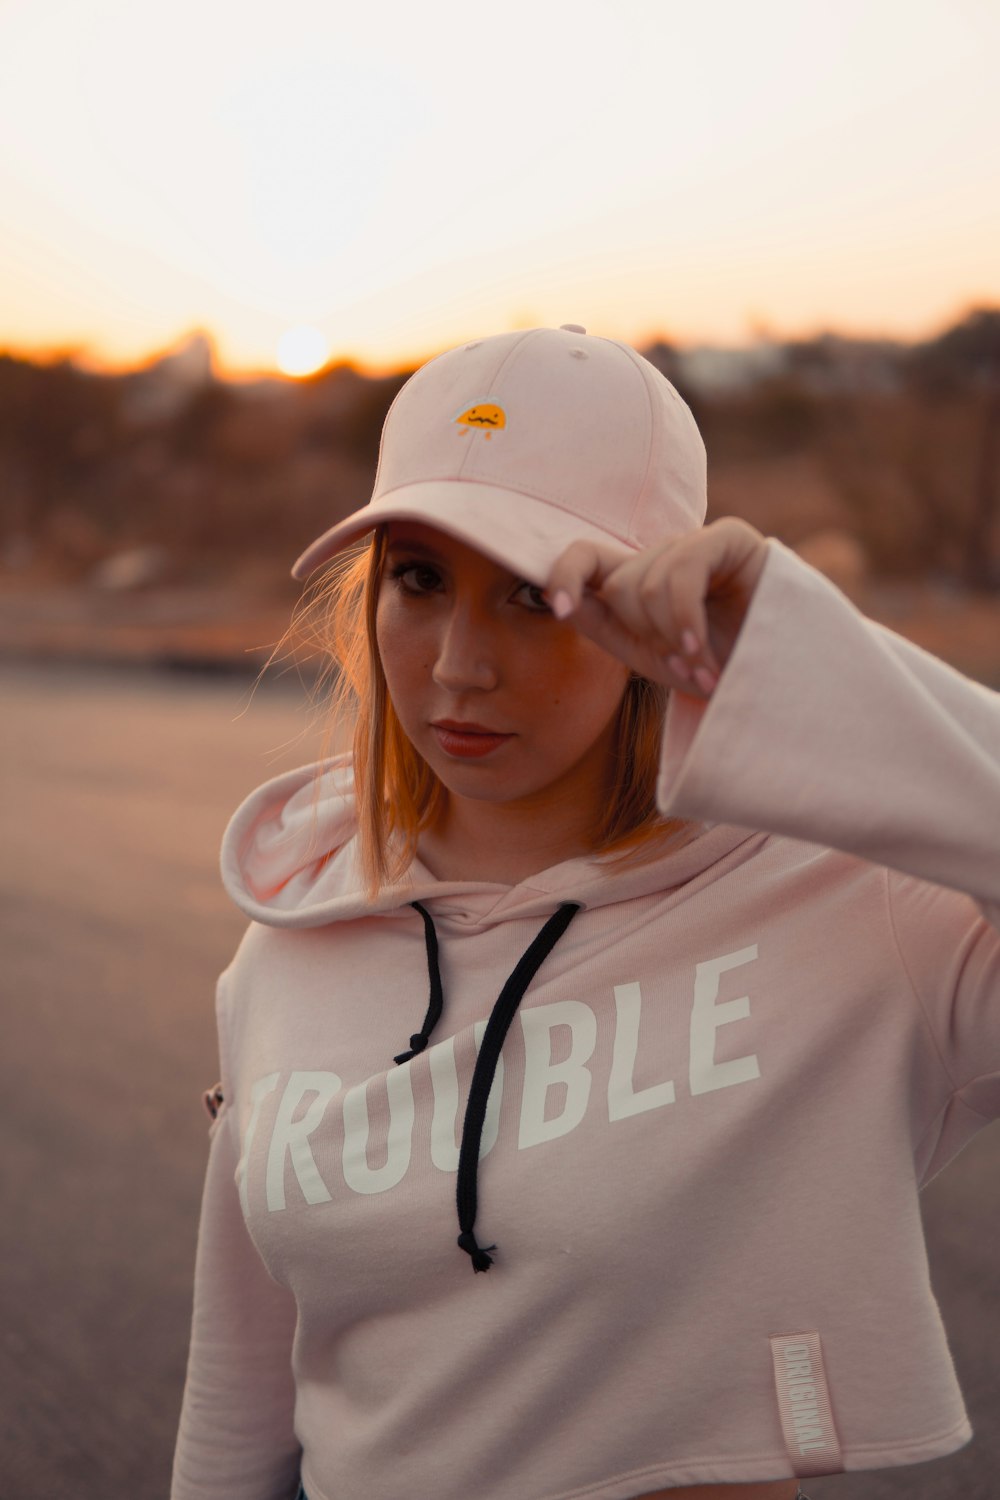 woman wearing pink Trouble hoodie and pink baseball cap